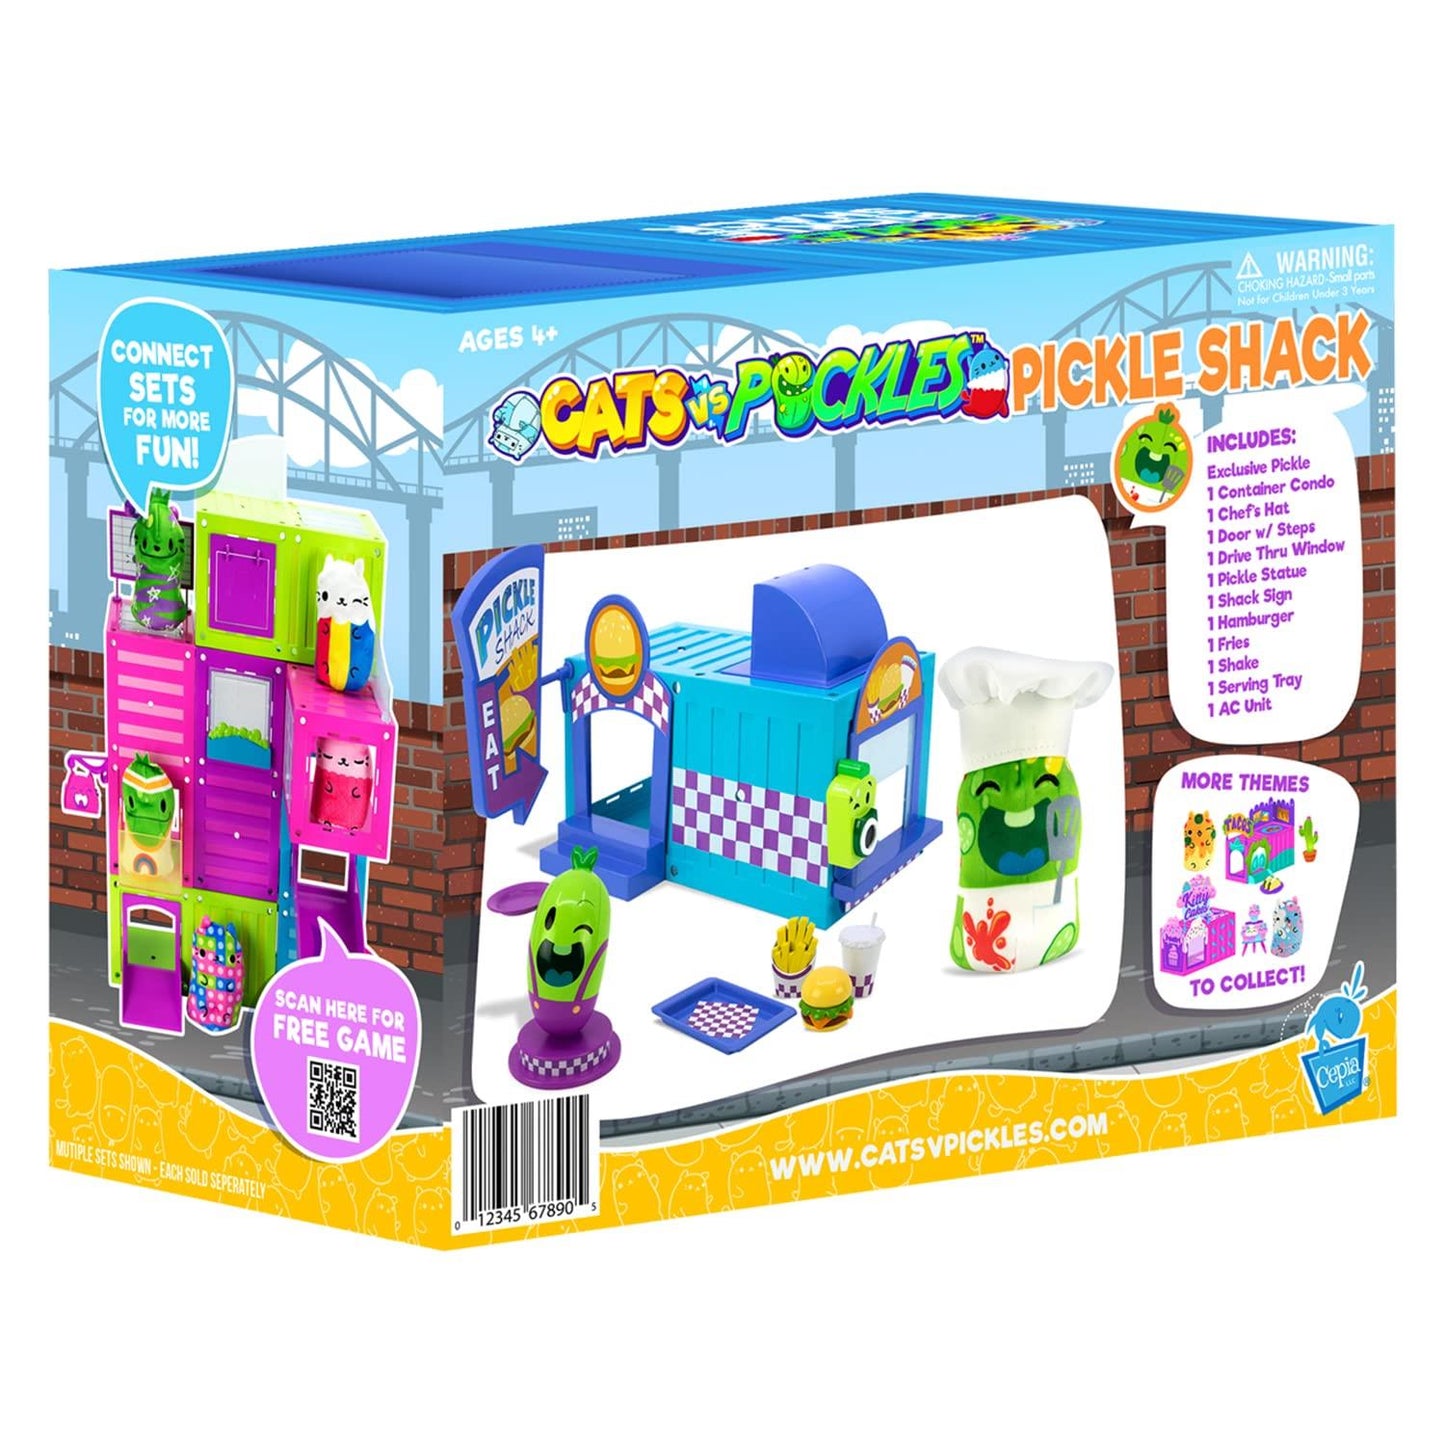 Cats Vs Pickles Shack Playset With Exclusive Pickle and Accessories